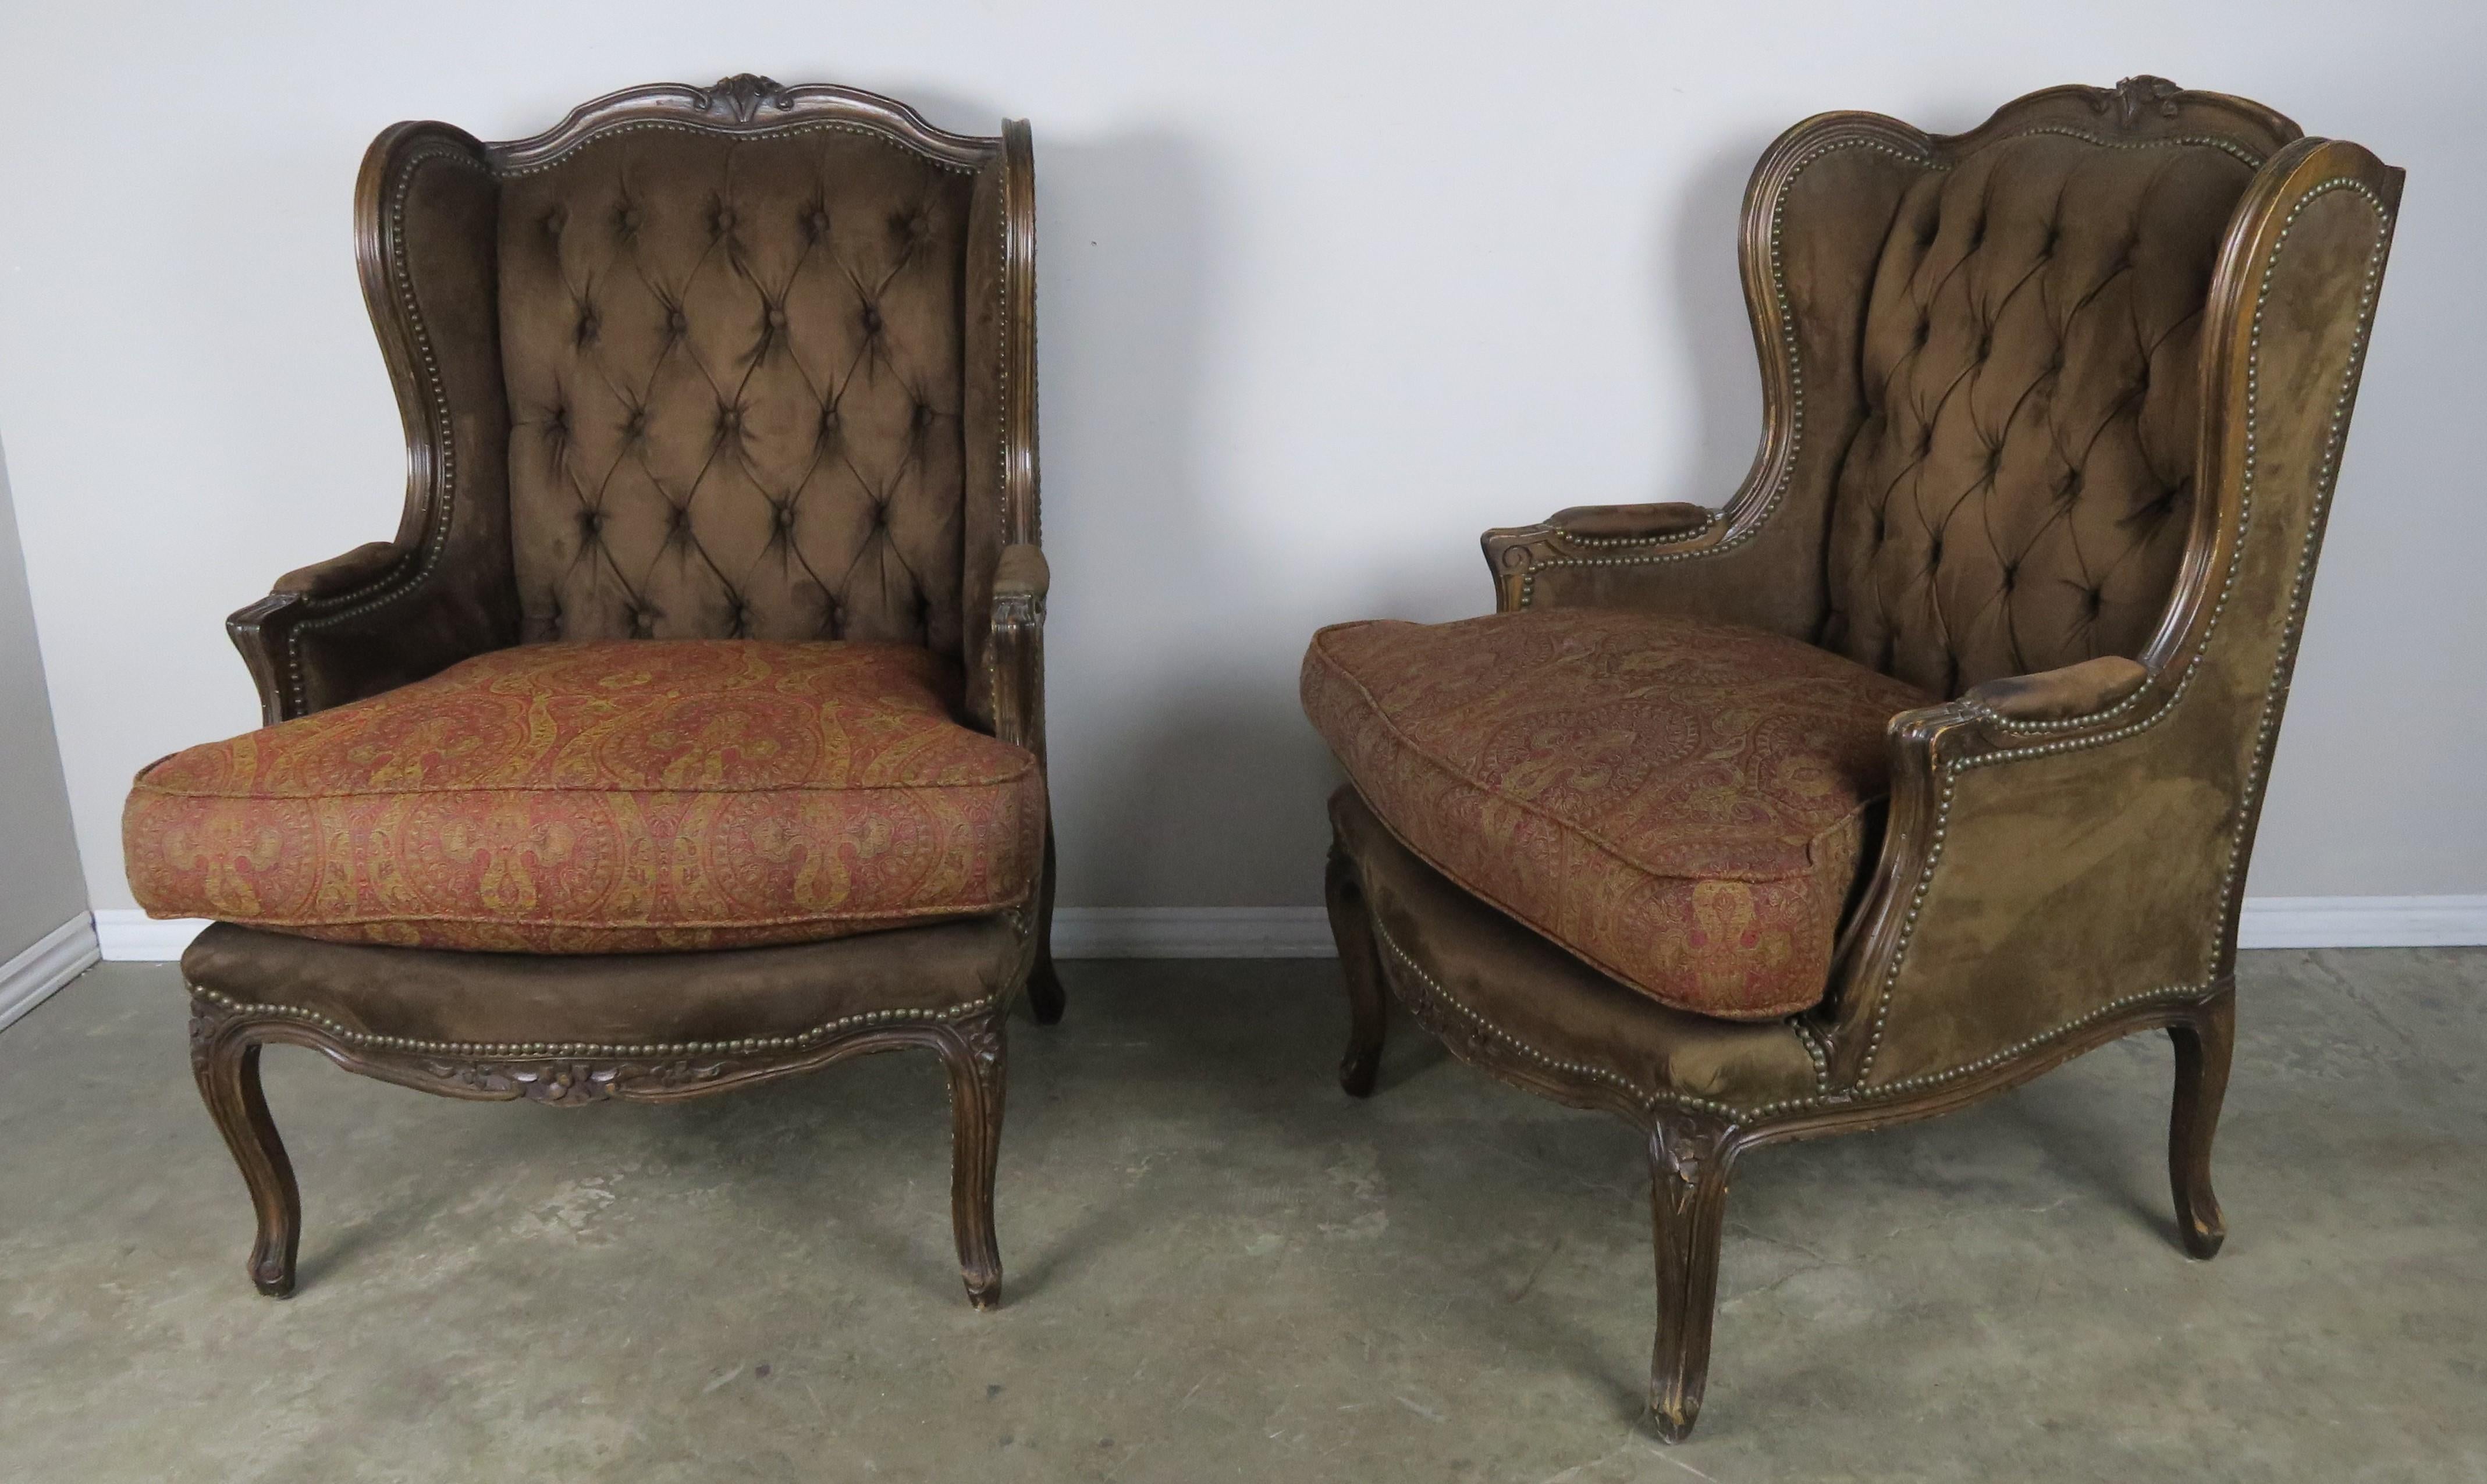 Pair of French Louis XV style carved walnut wingback armchairs upholstered in tufted ultra suede with antique brass colored nailhead trim detail. The armchairs stand on four cabriole legs. Loose contrasting cushions upholstered in a wool paisley